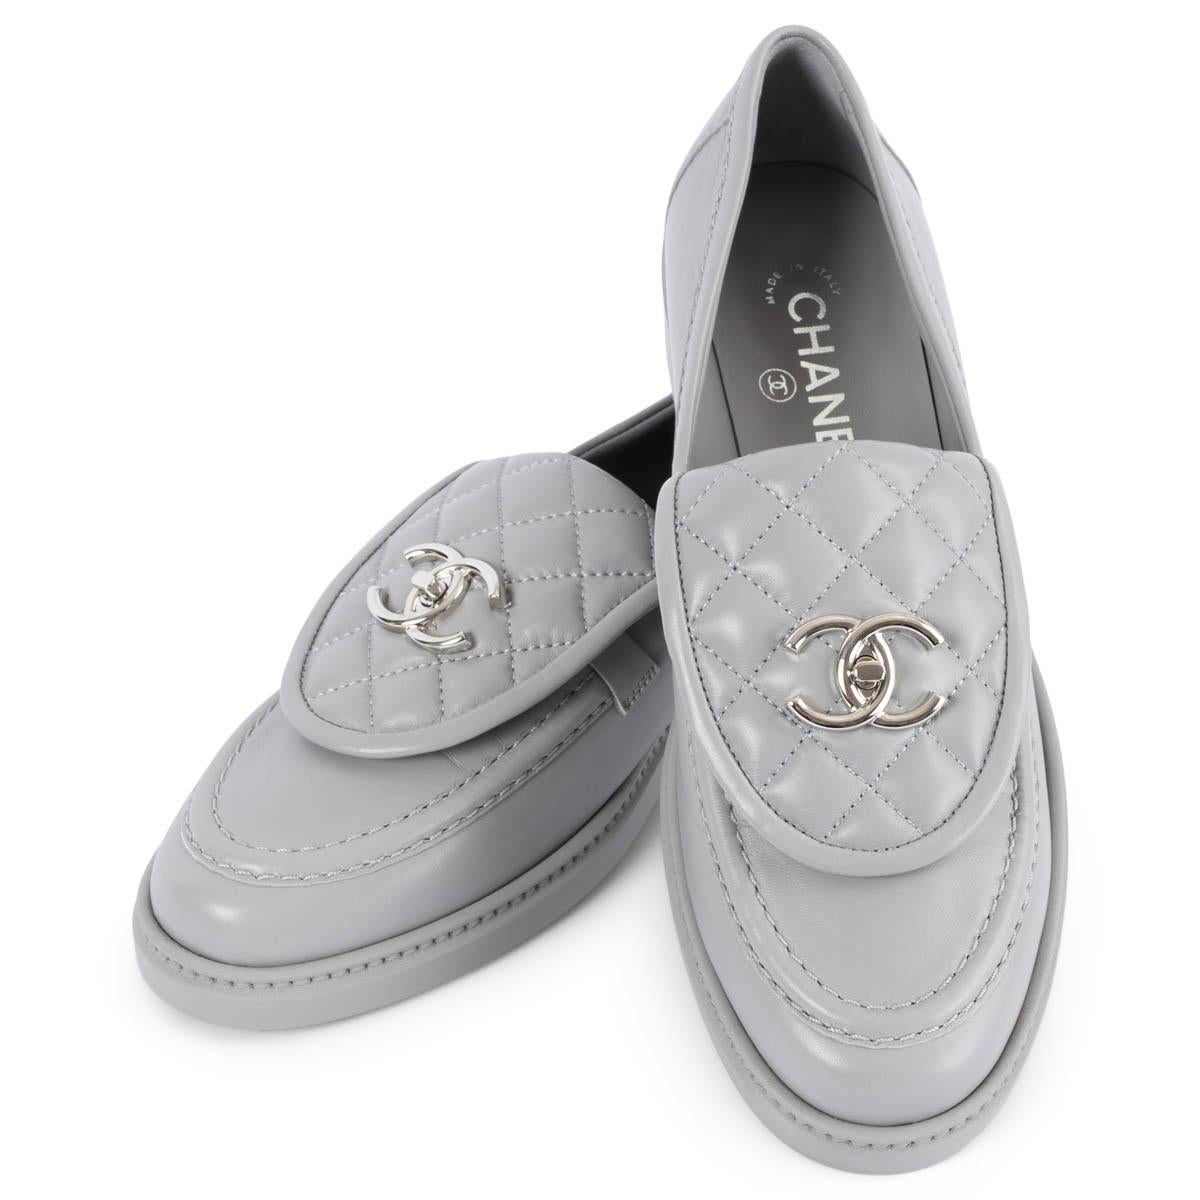 CHANEL grey leather 2021 21B TURNLOCK Loafers Flats Shoes 39 4